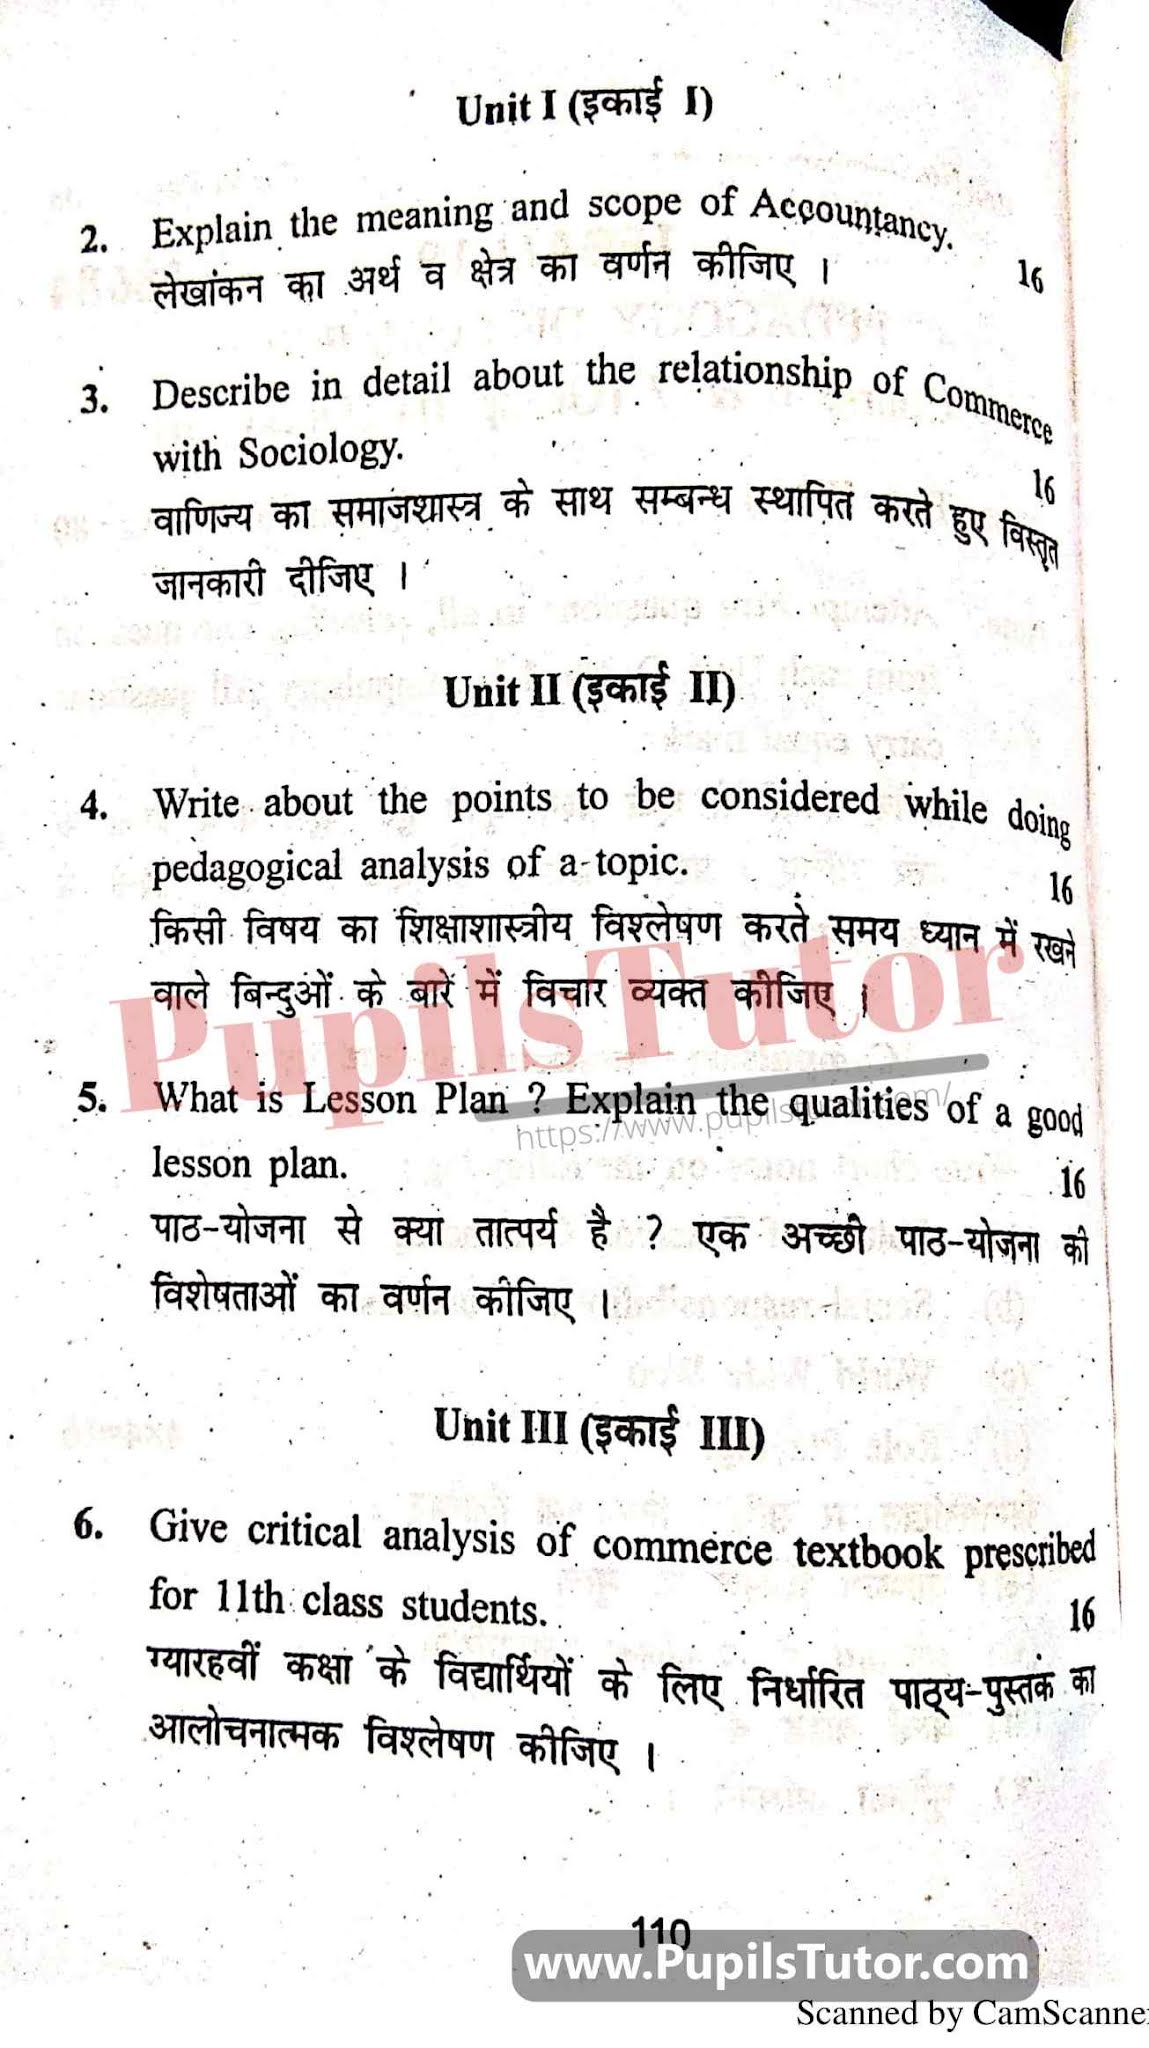 KUK (Kurukshetra University, Haryana) Pedagogy Of Commerce Question Paper 2019 For B.Ed 1st And 2nd Year And All The 4 Semesters In English And Hindi Medium Free Download PDF - Page 2 - www.pupilstutor.com